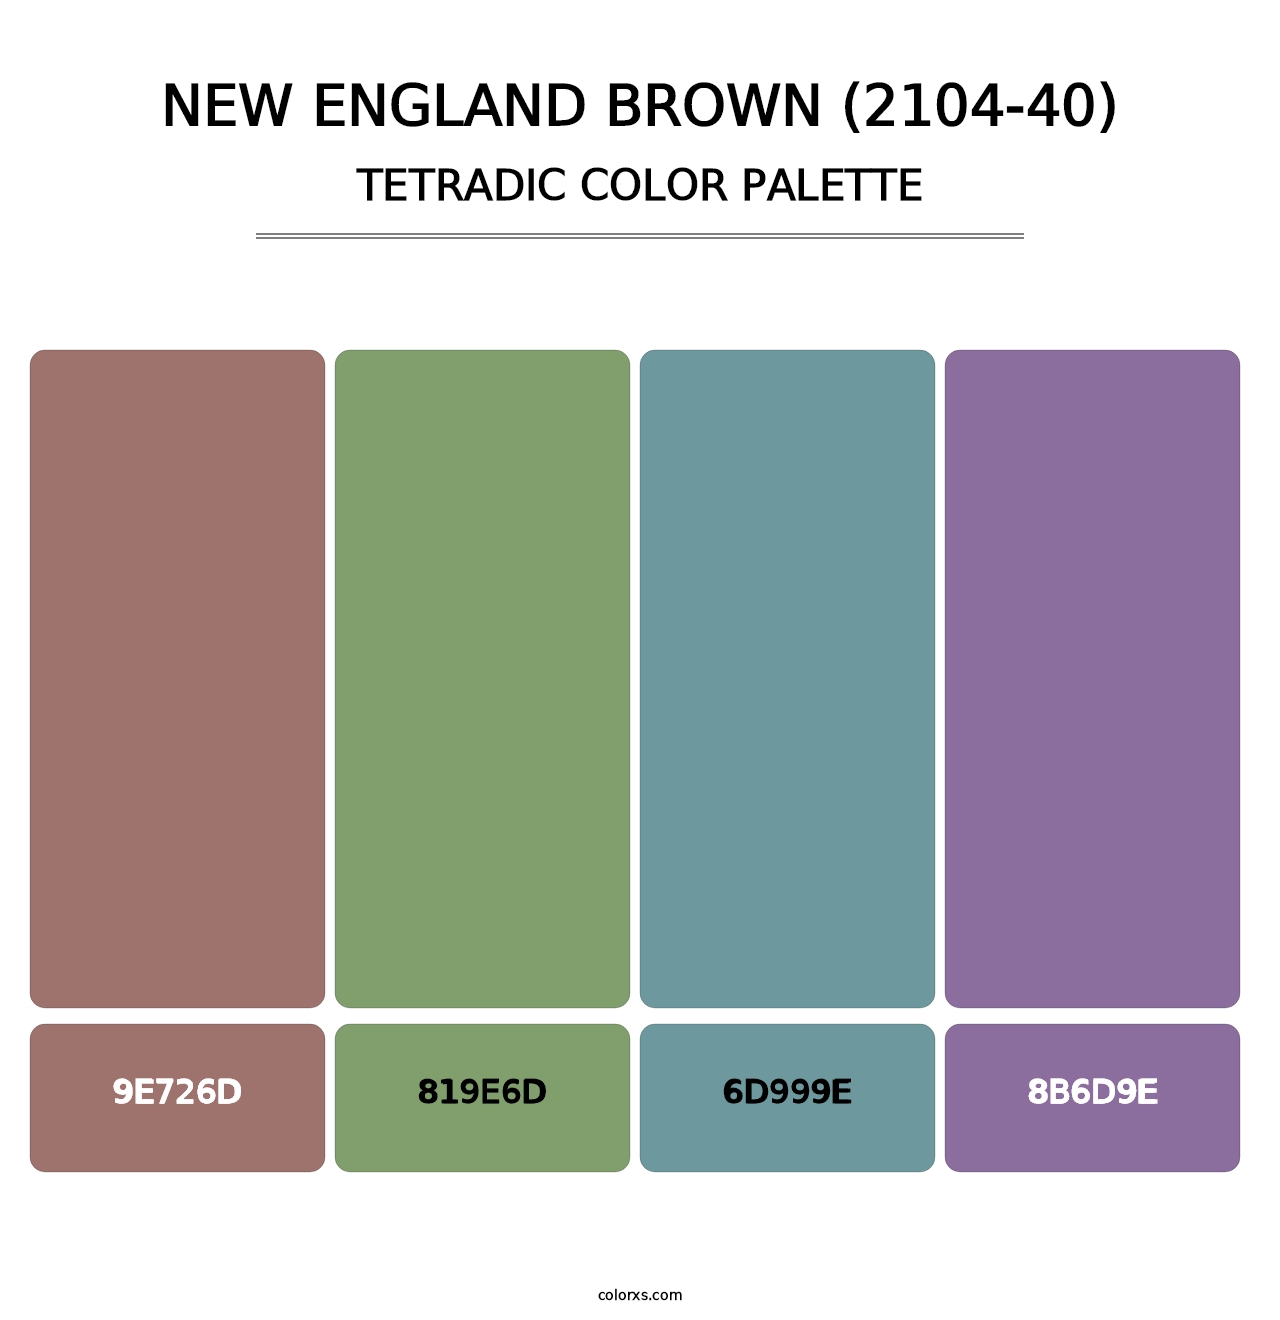 New England Brown (2104-40) - Tetradic Color Palette